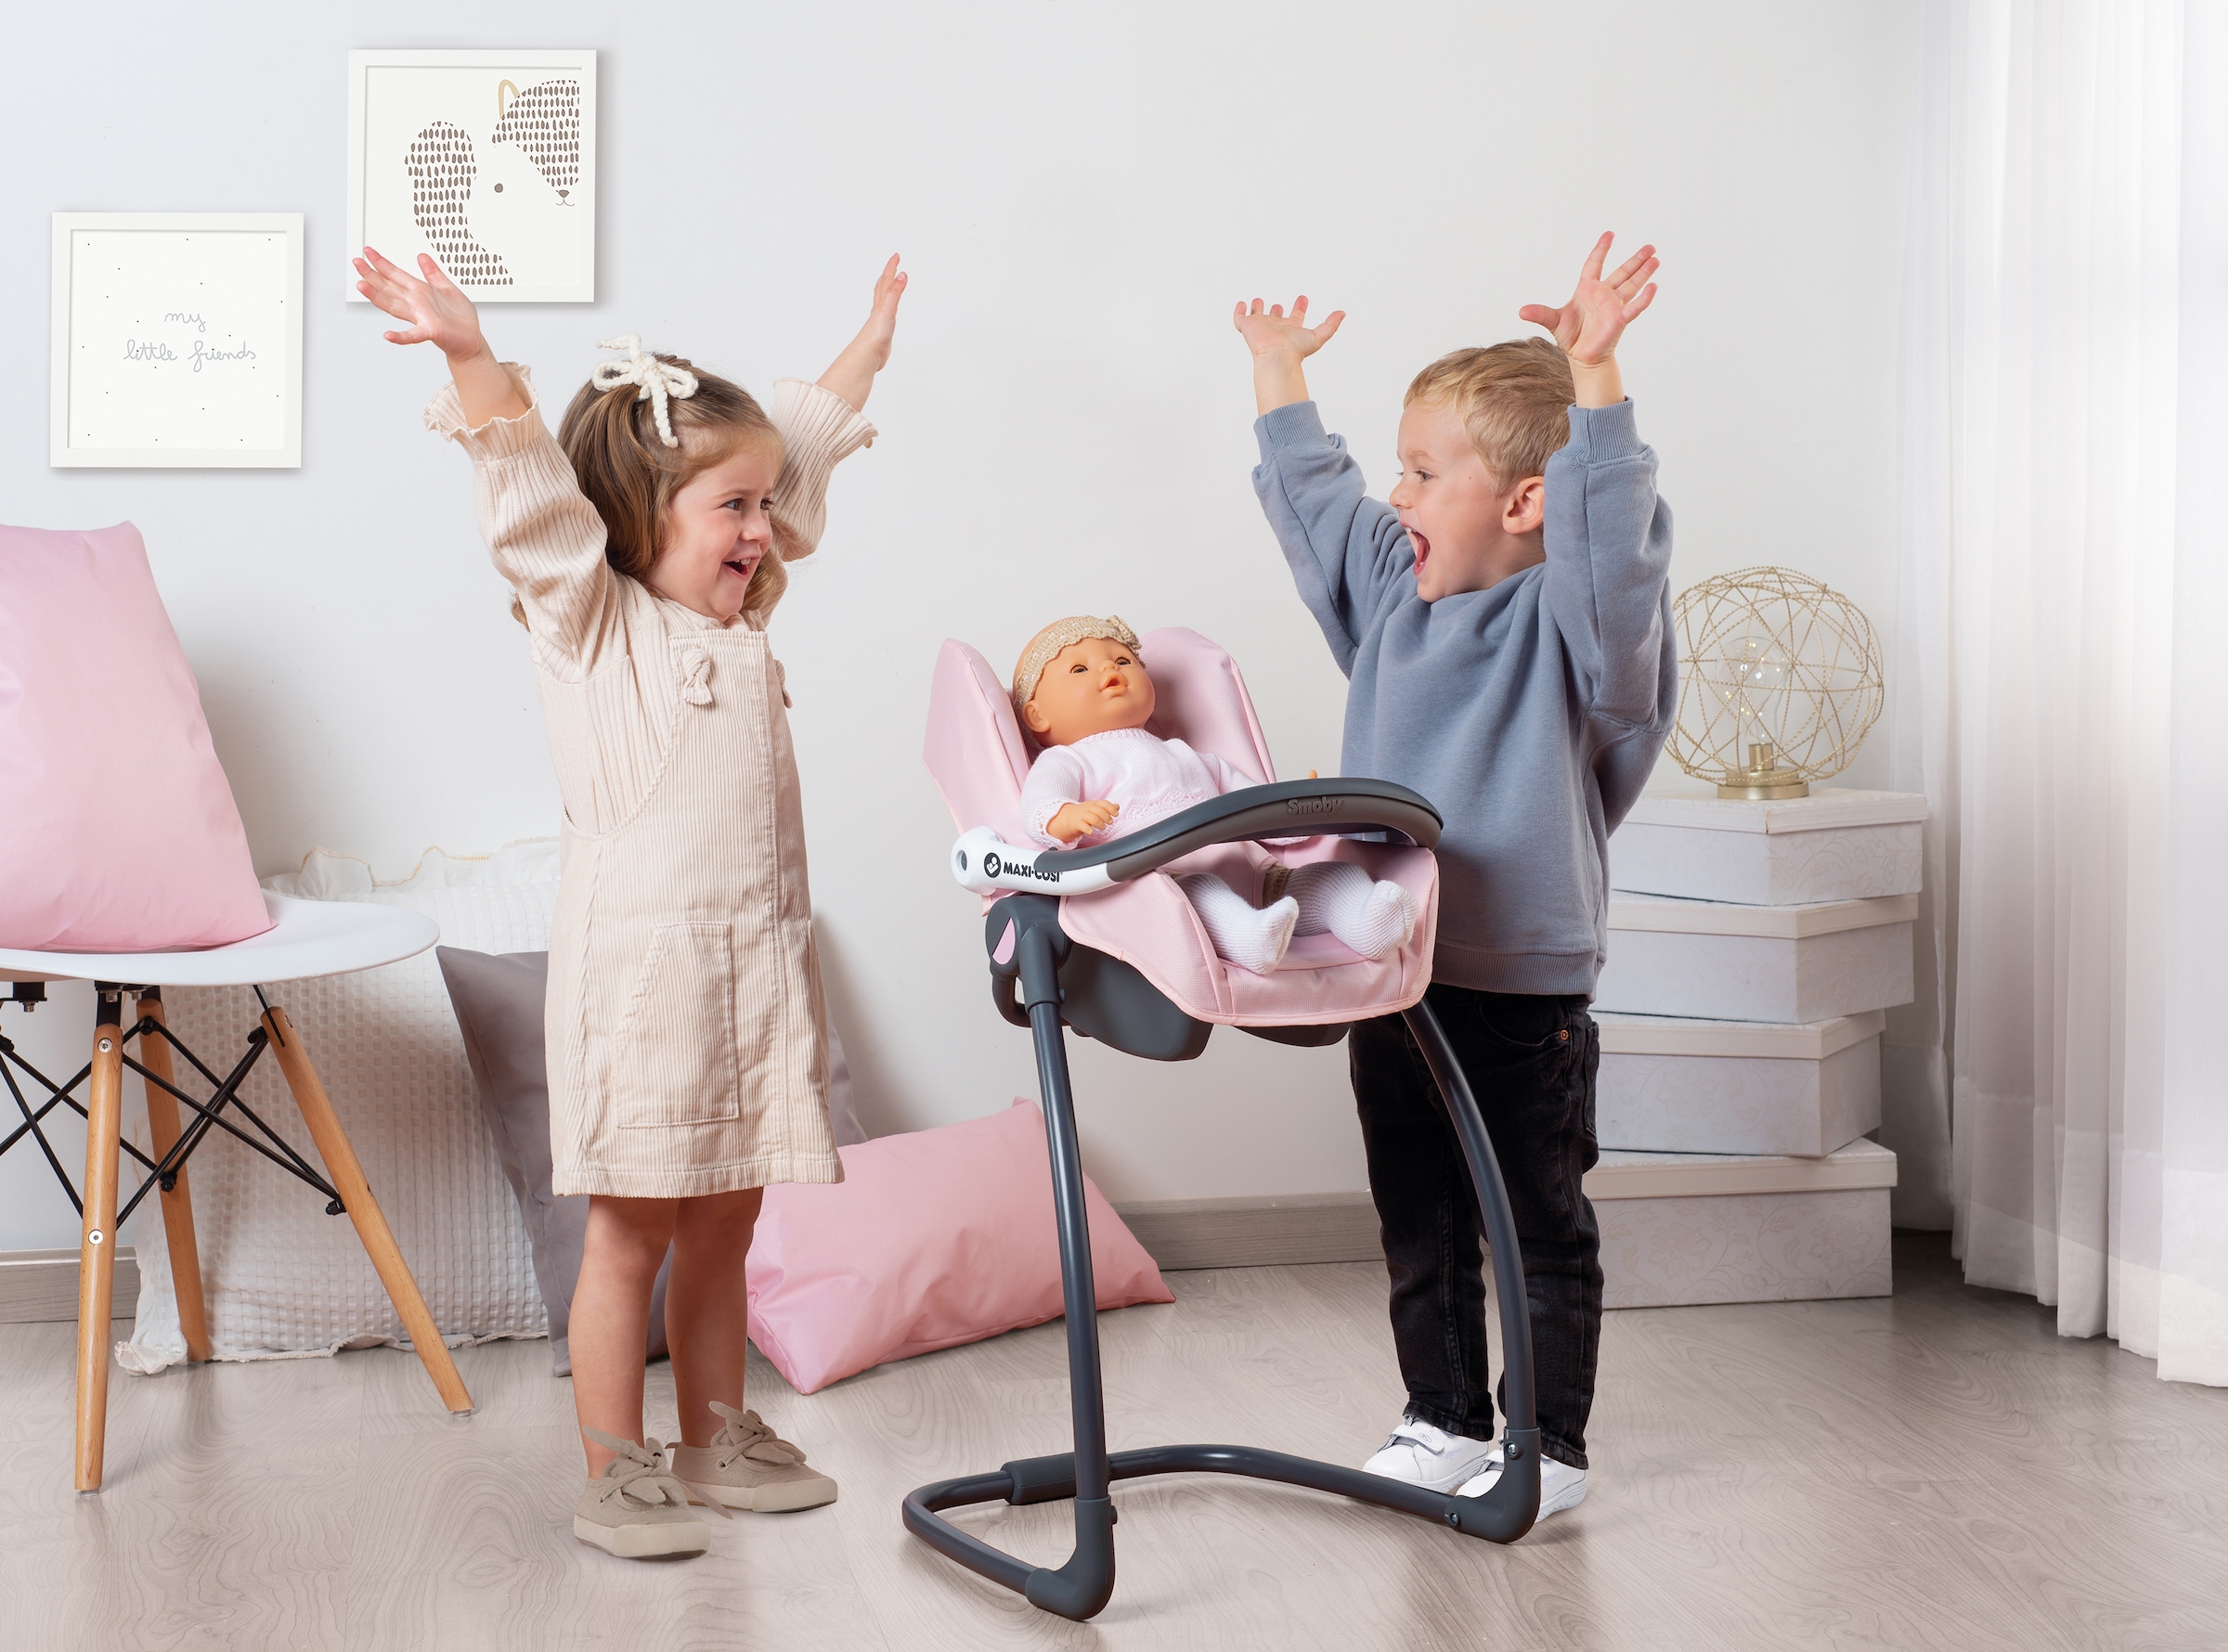 Smoby Puppenhochstuhl »Maxi-Cosi 3in1«, Made in Europe